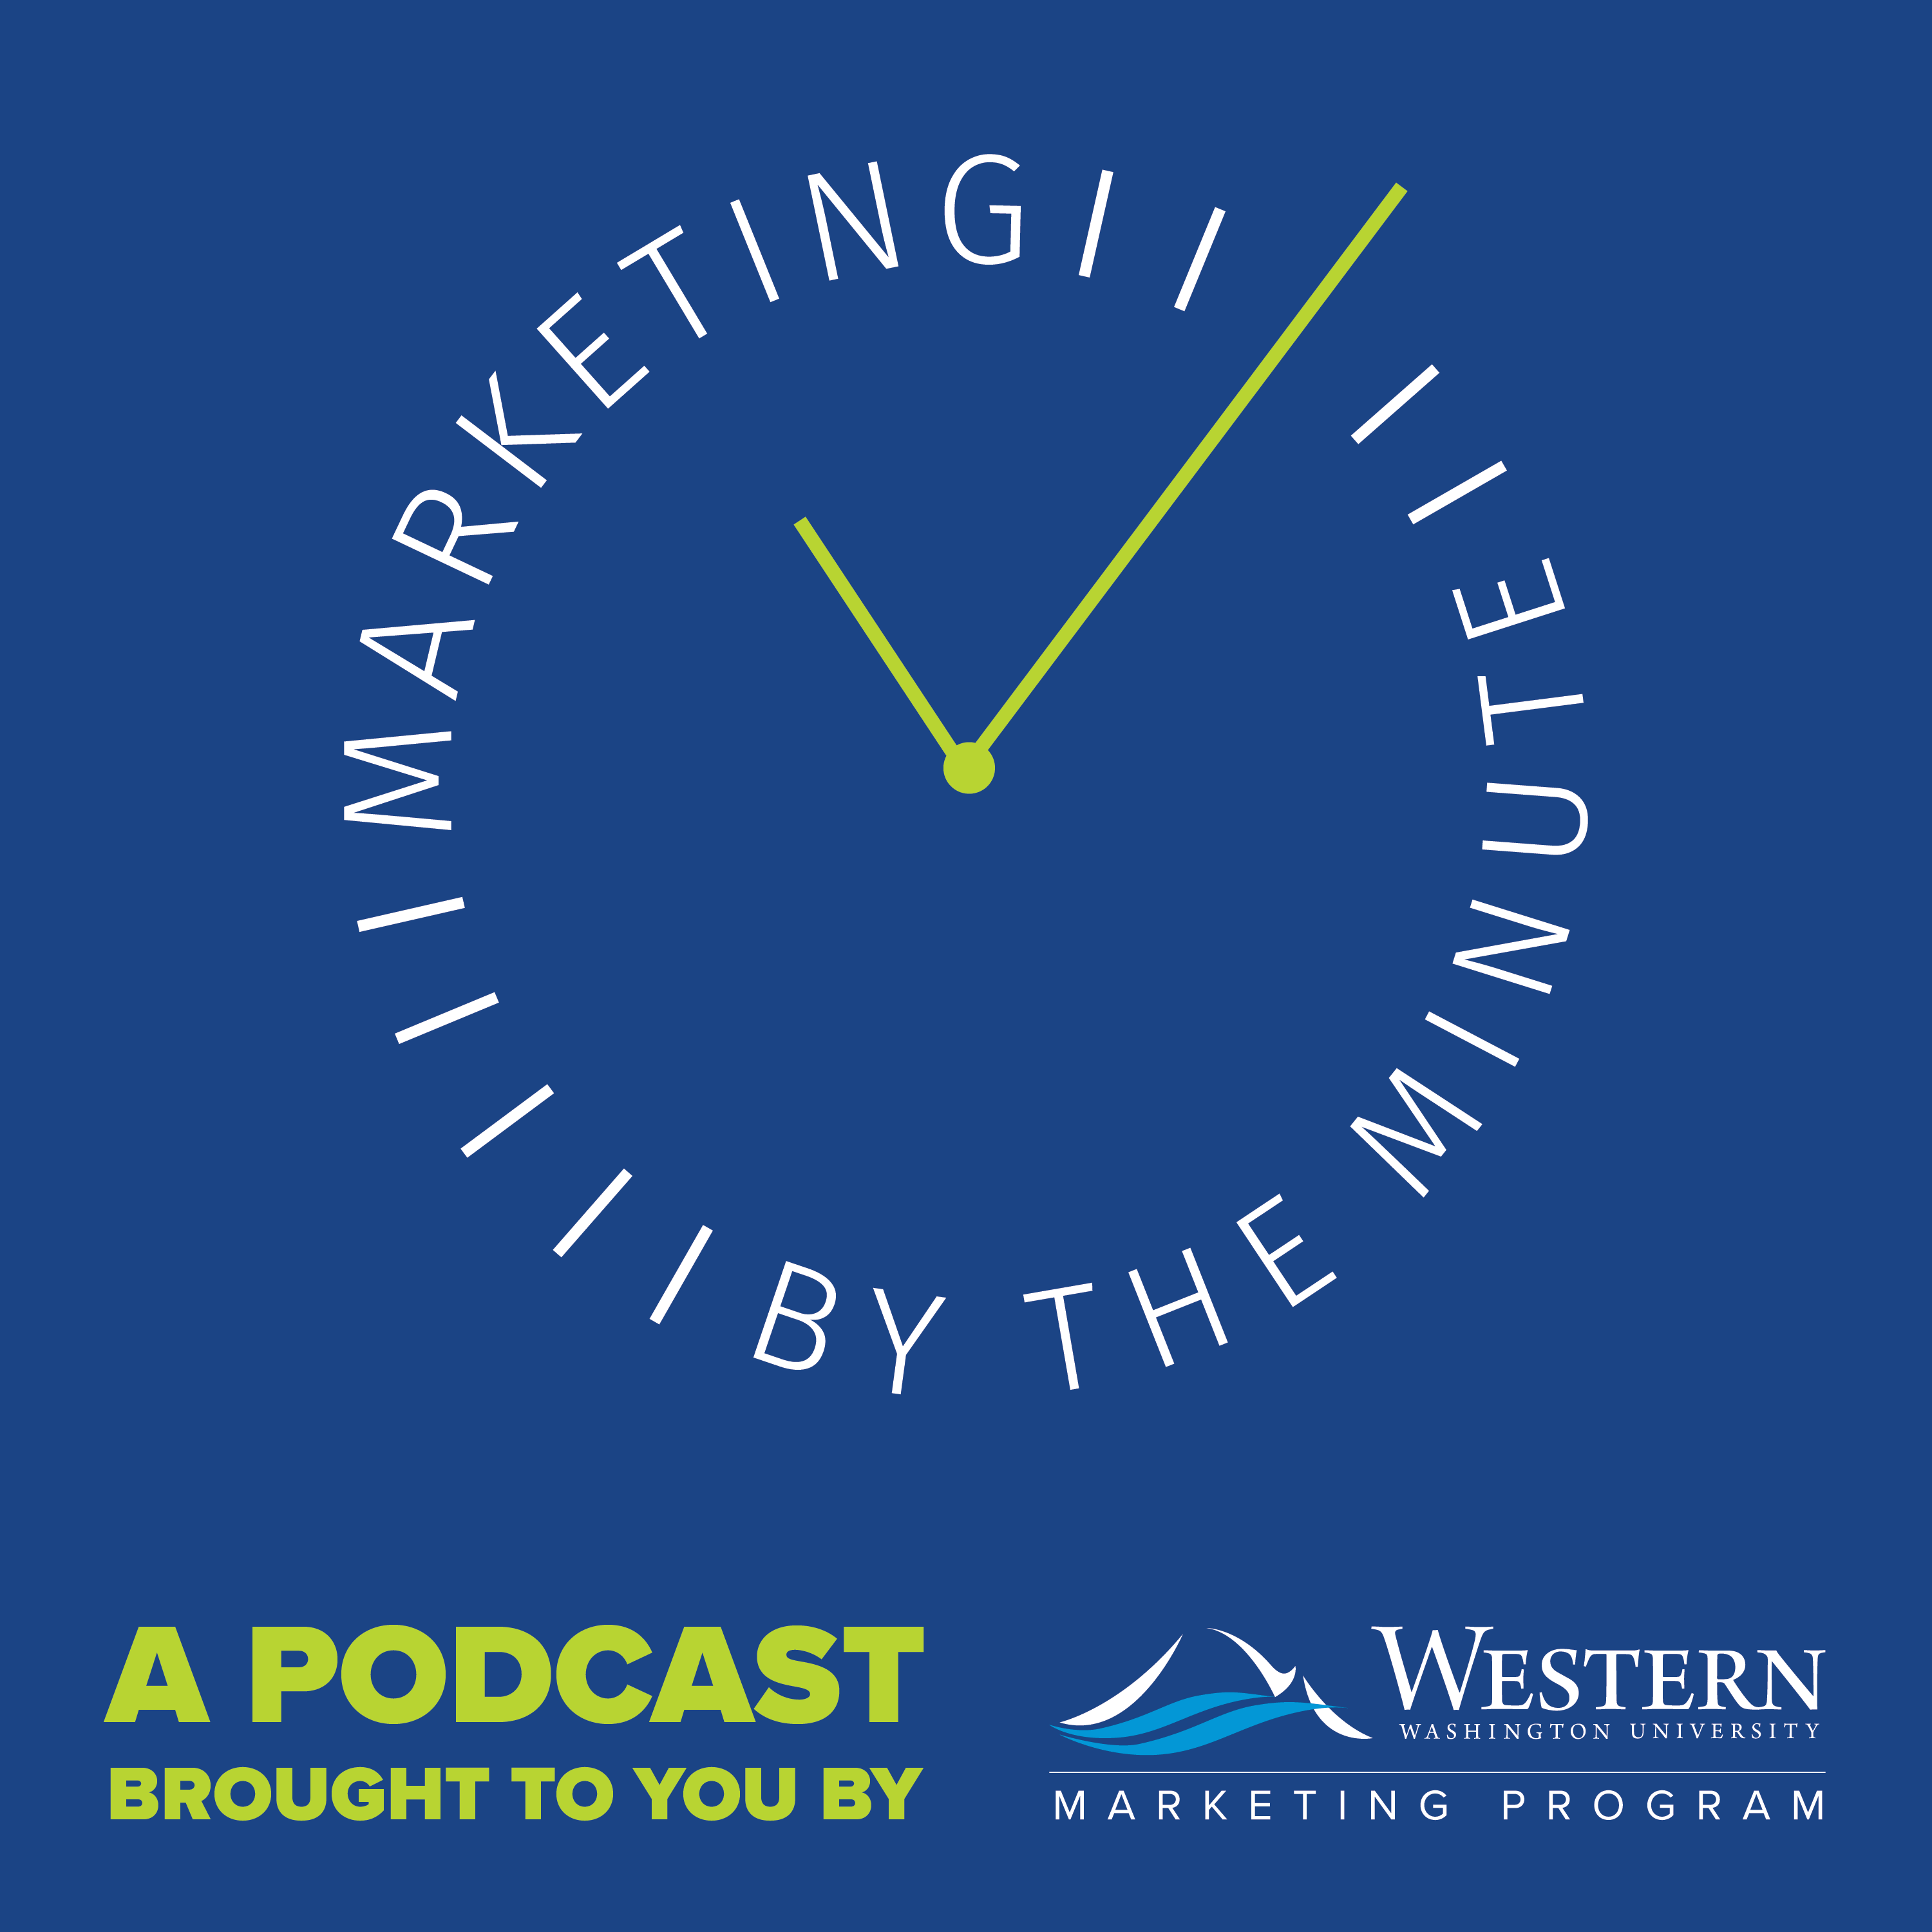 Marketing by the Minute podcast image with clock face design and WWU Marketing Program logo